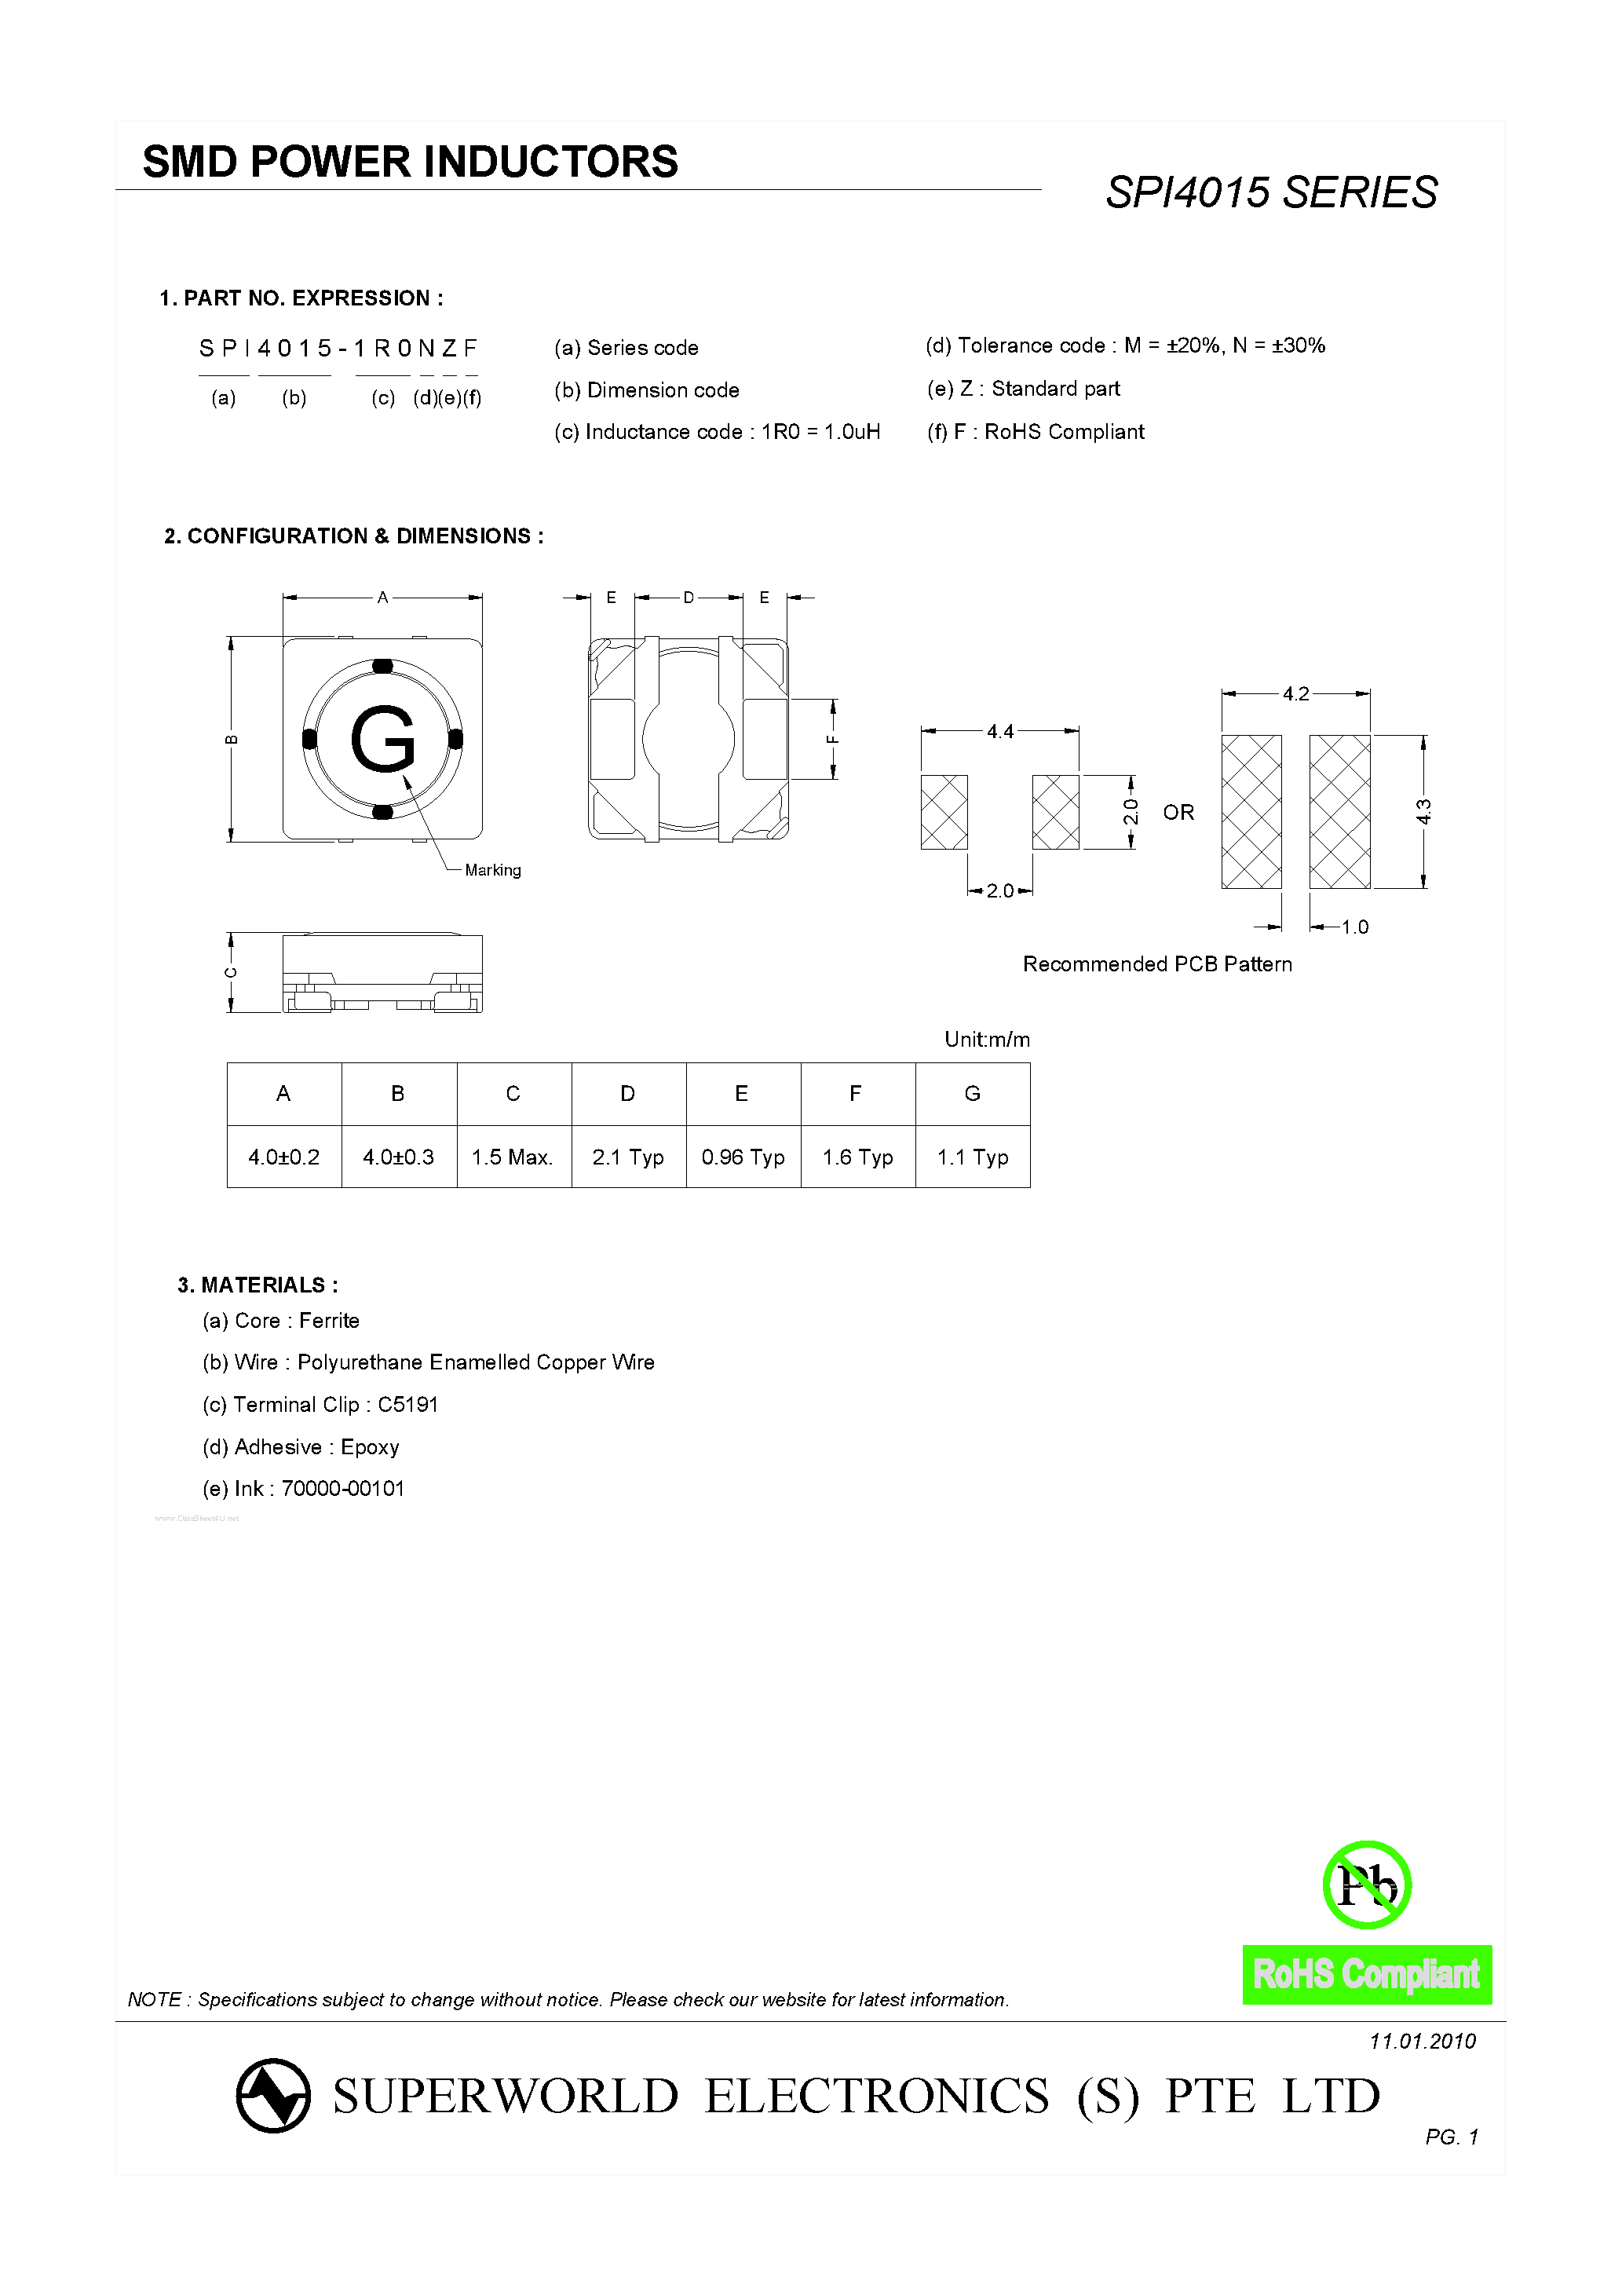 Datasheet SPI4015 - SMD POWER INDUCTORS page 1